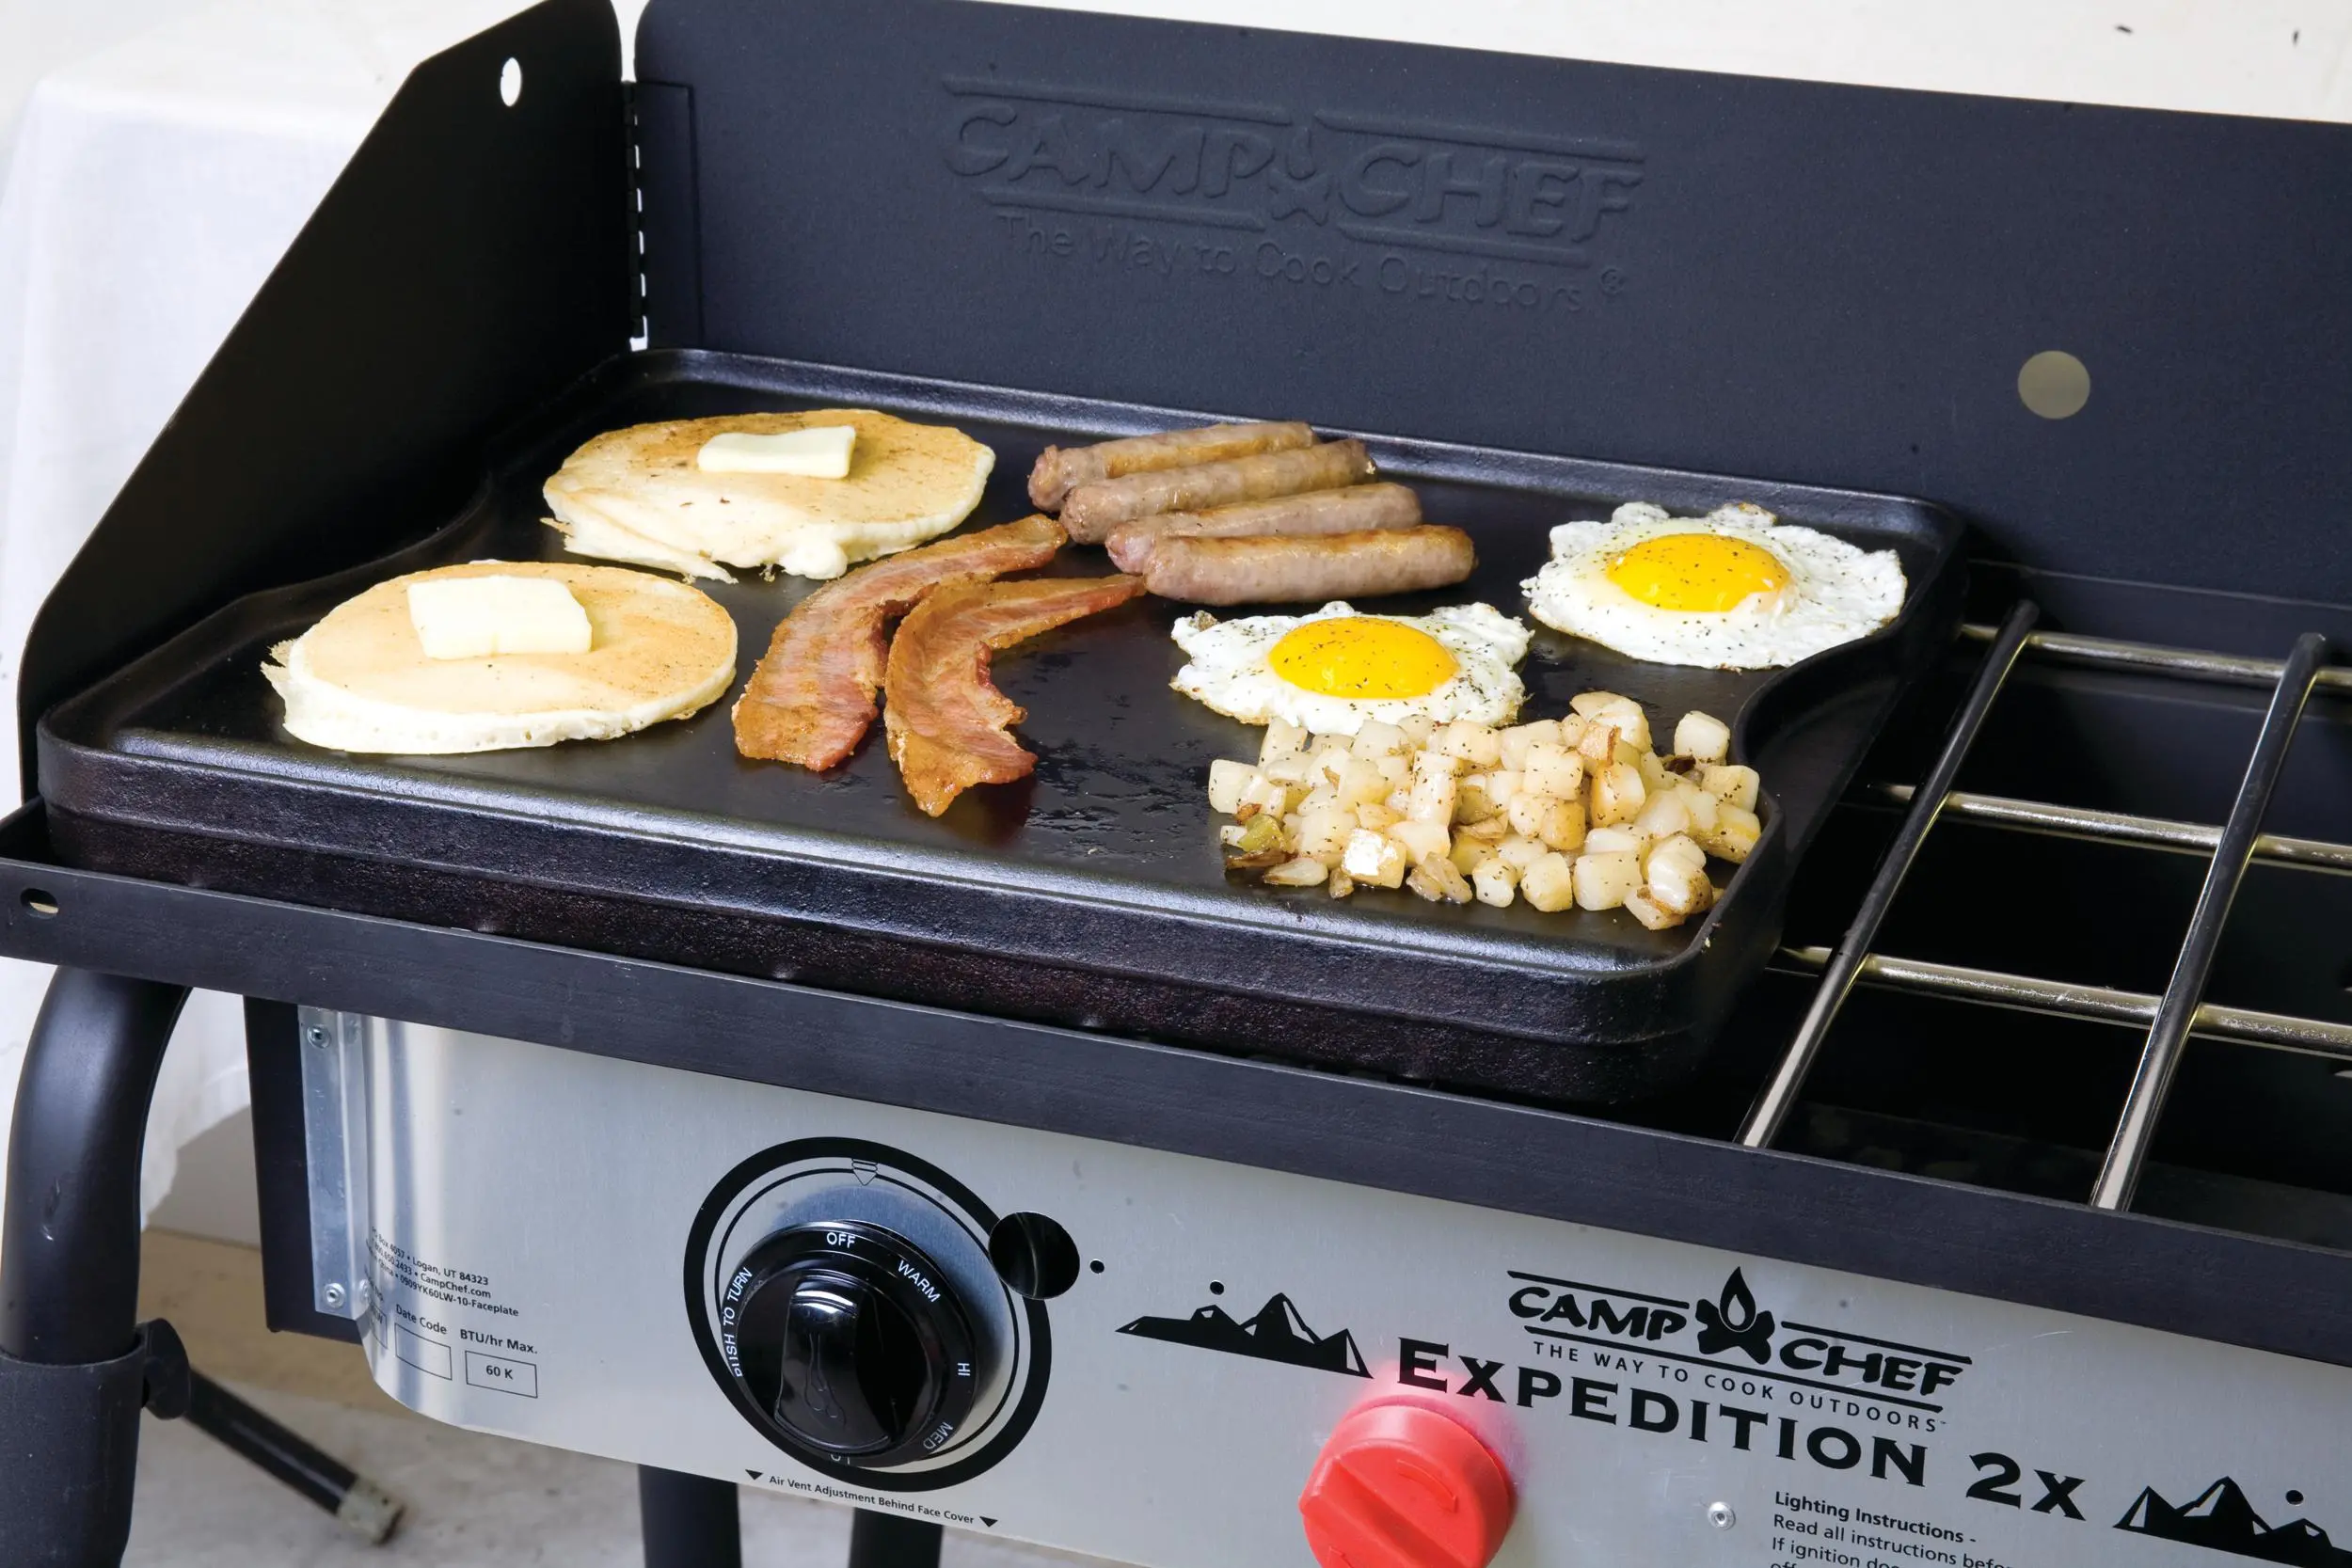 https://static.rcwilley.com/products/4403452/Reversible-Grill-Griddle-rcwilley-image1.webp